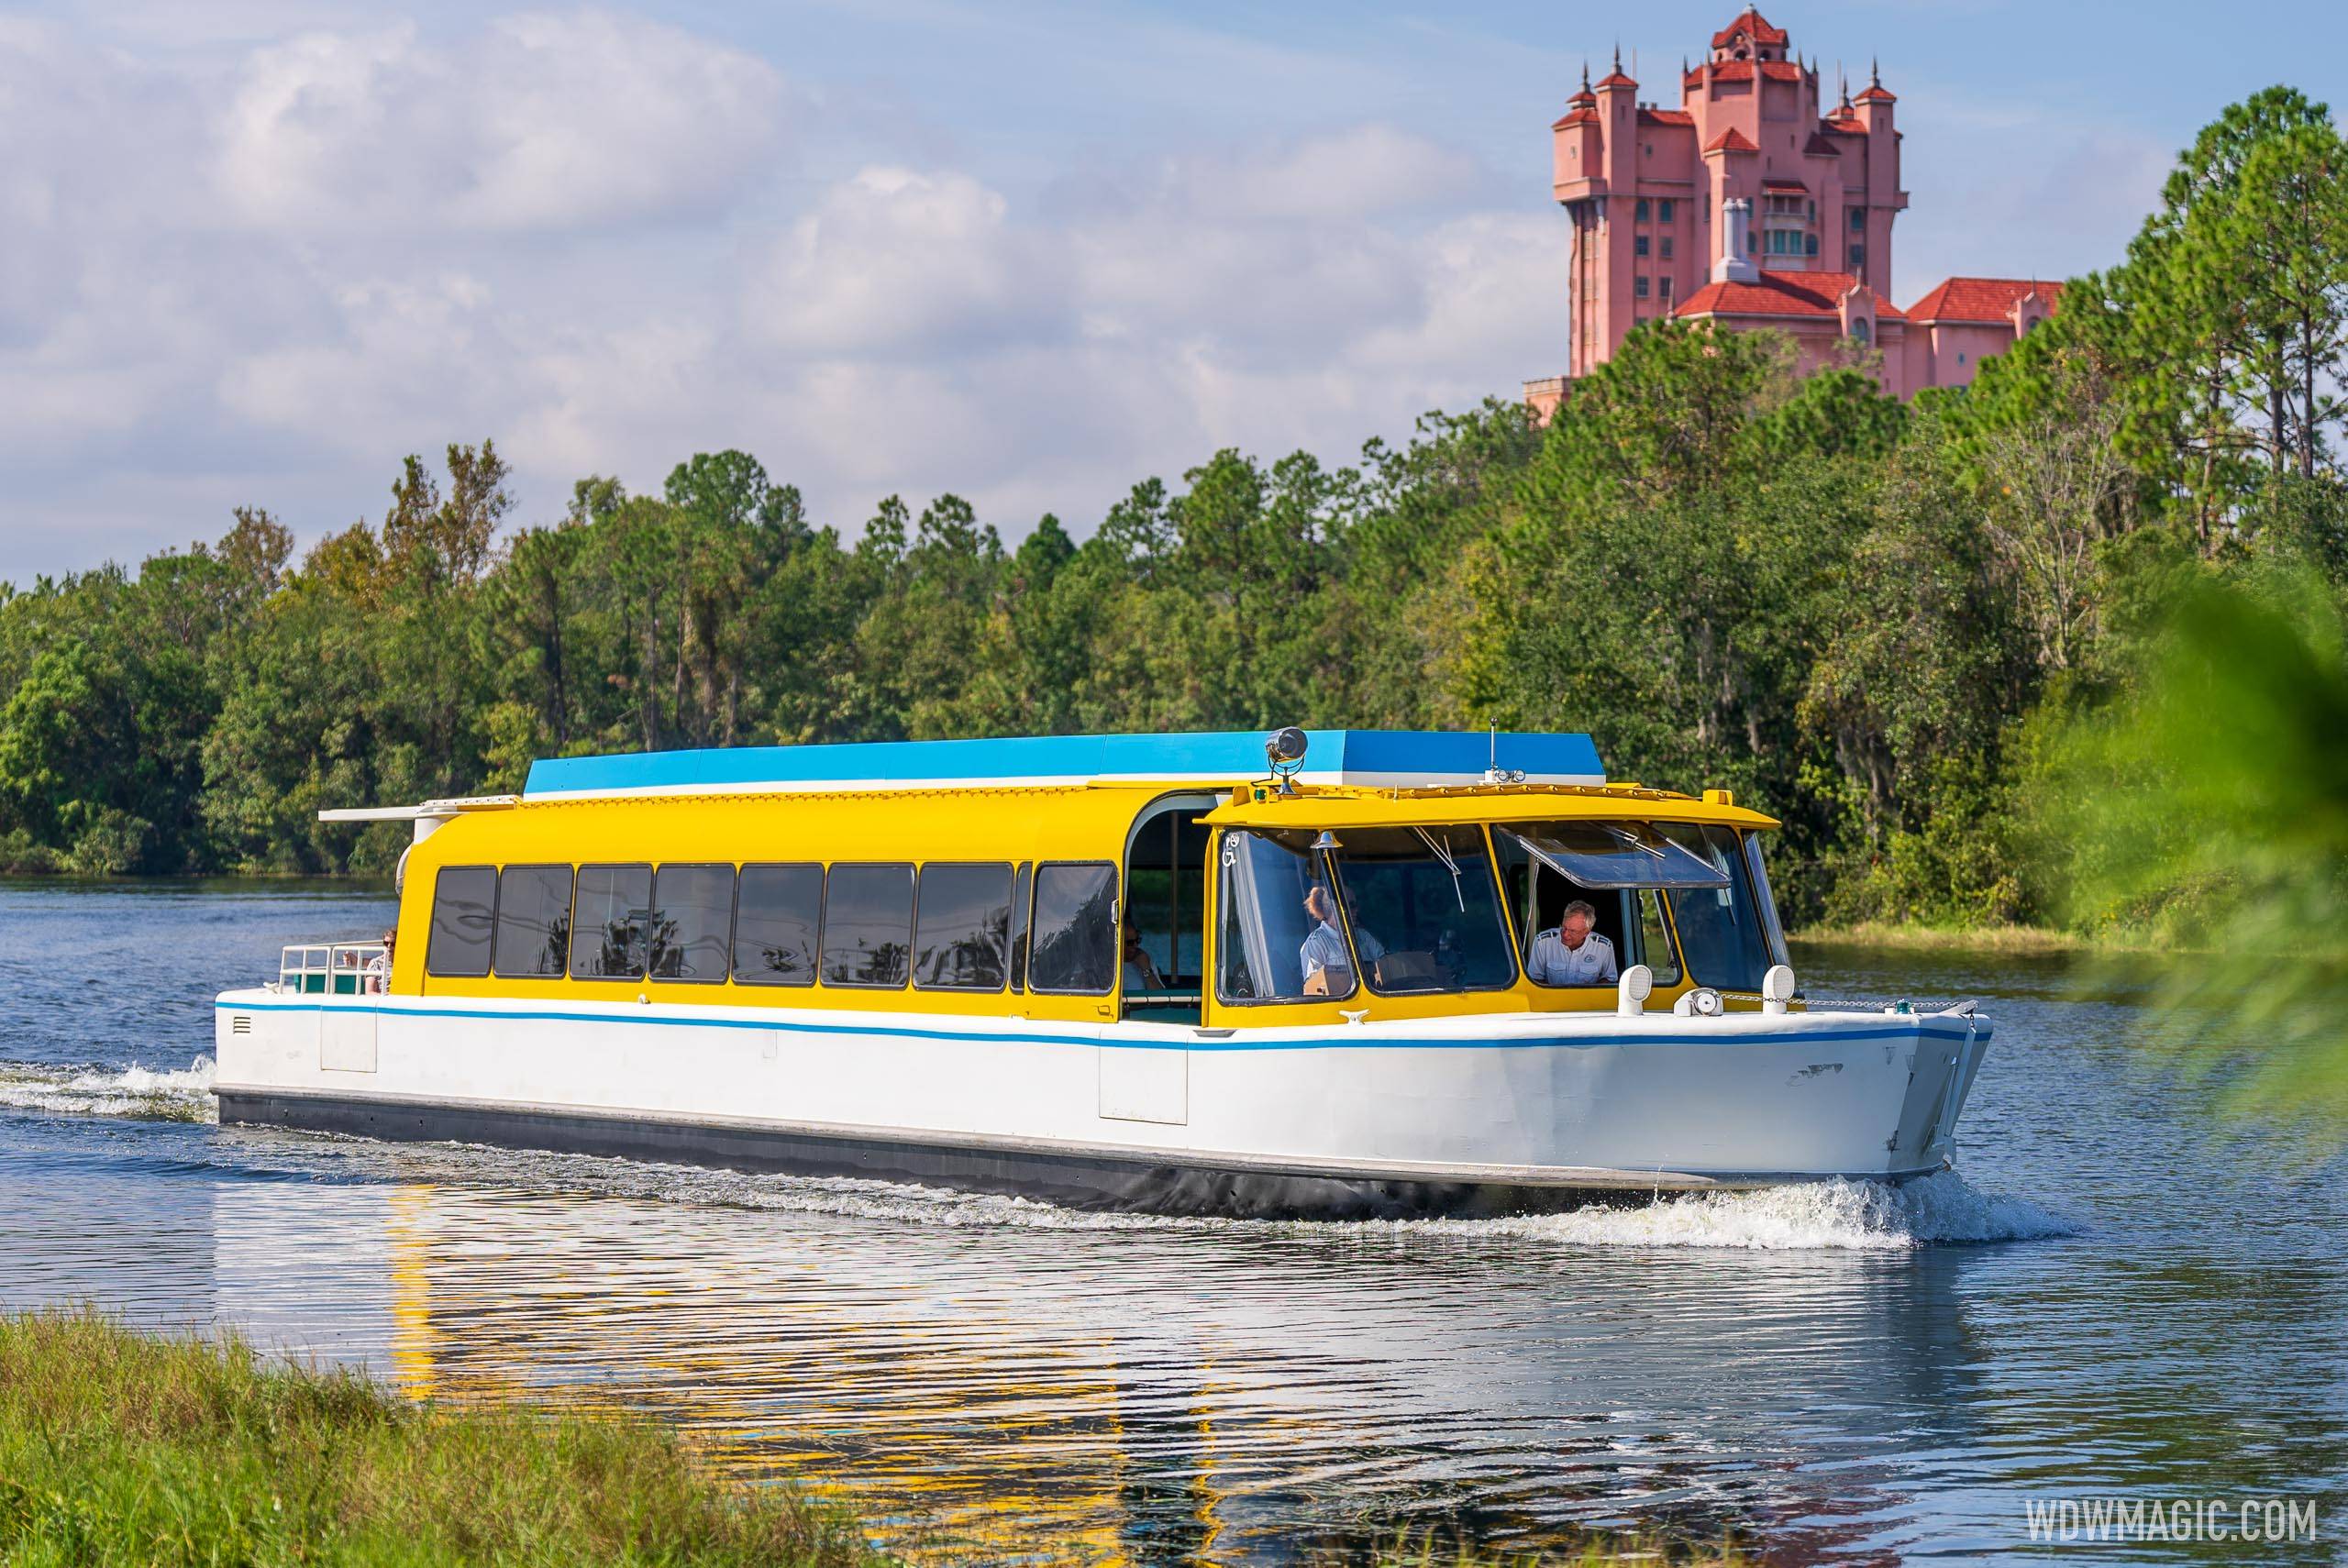 Friendship IV is the latest Walt Disney World boat to get a new look